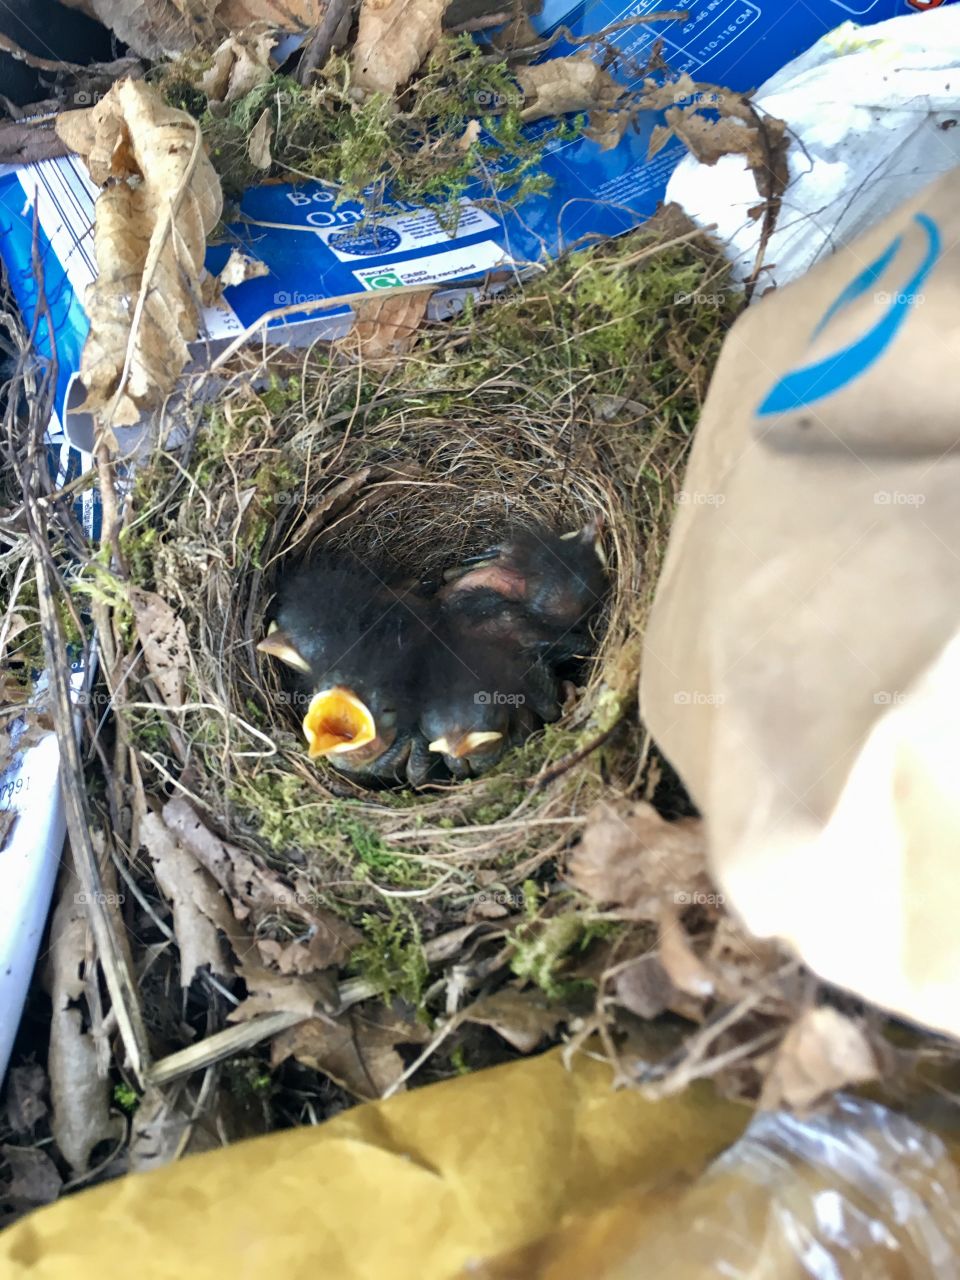 Baby robins nesting in the wheelie bin. Every time you lift the lid they thought it was feed time. 